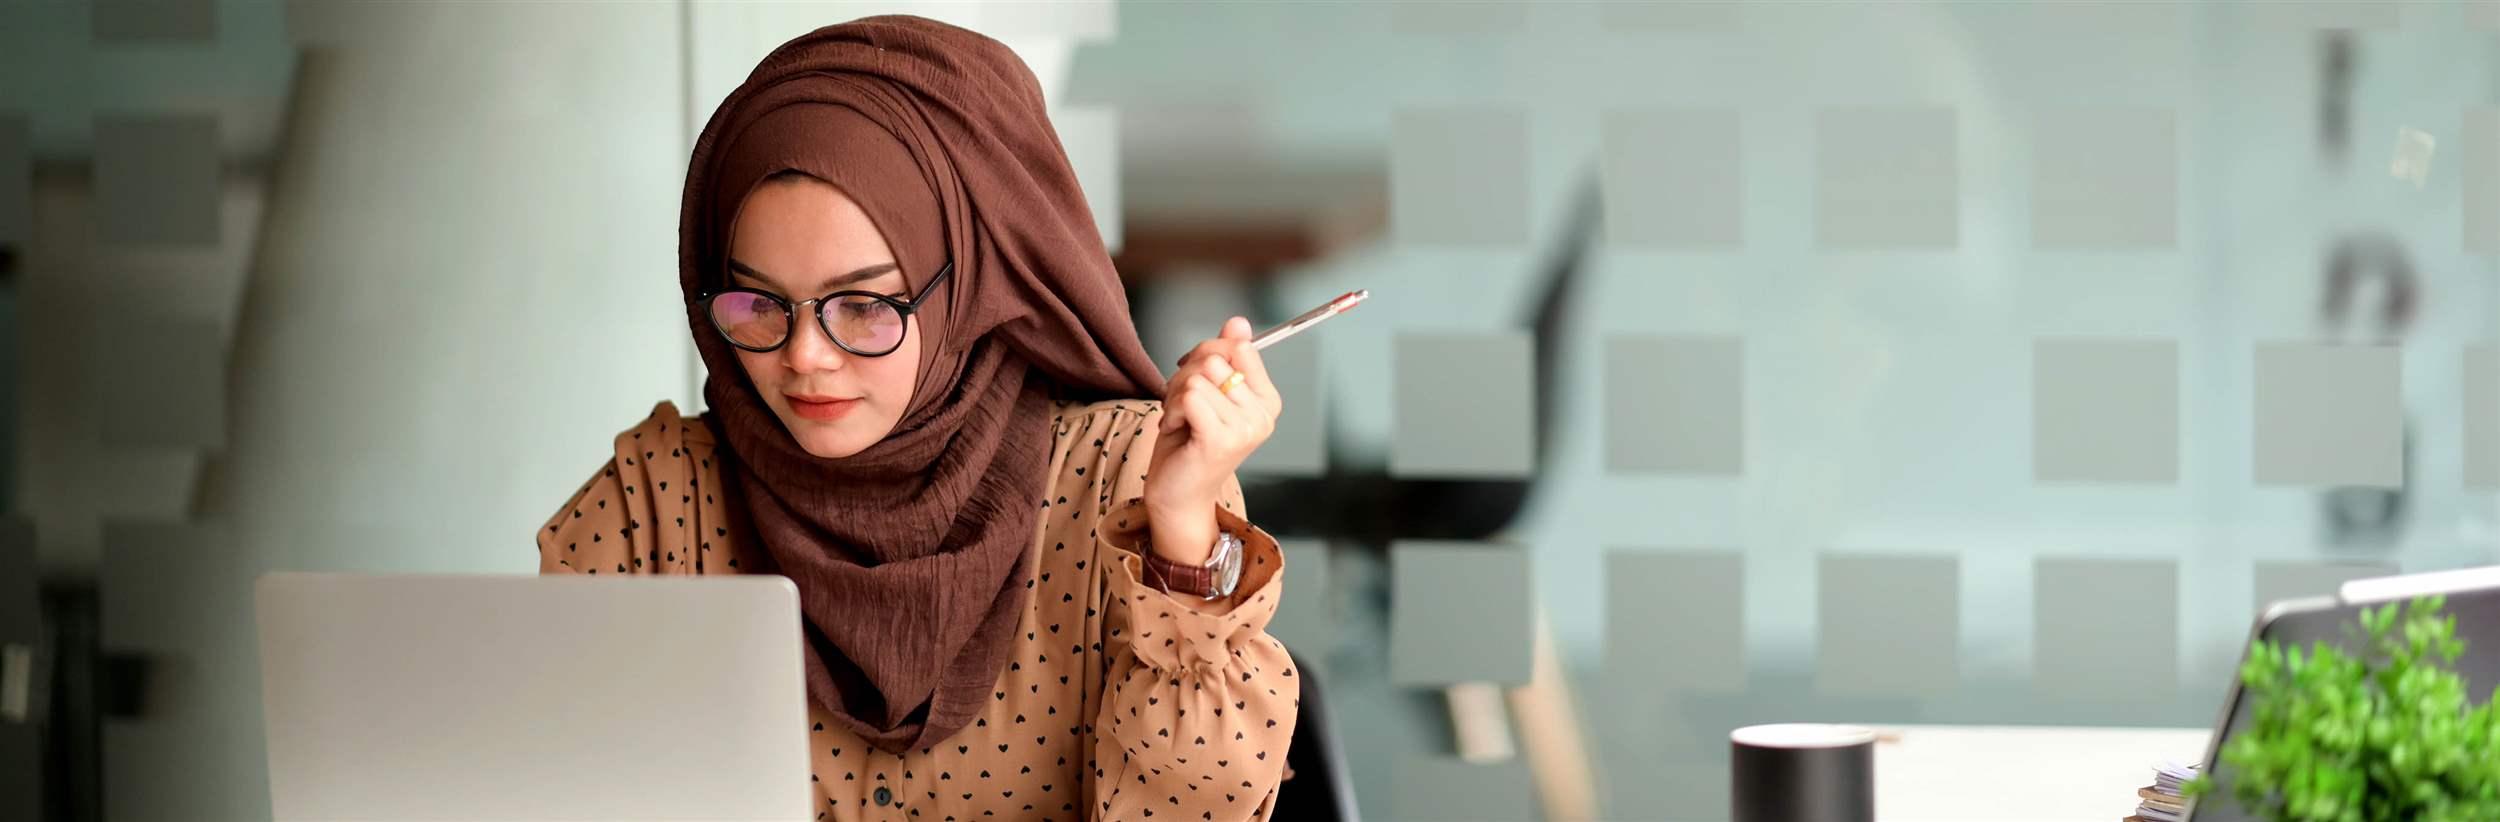 Attractive muslin woman working in office